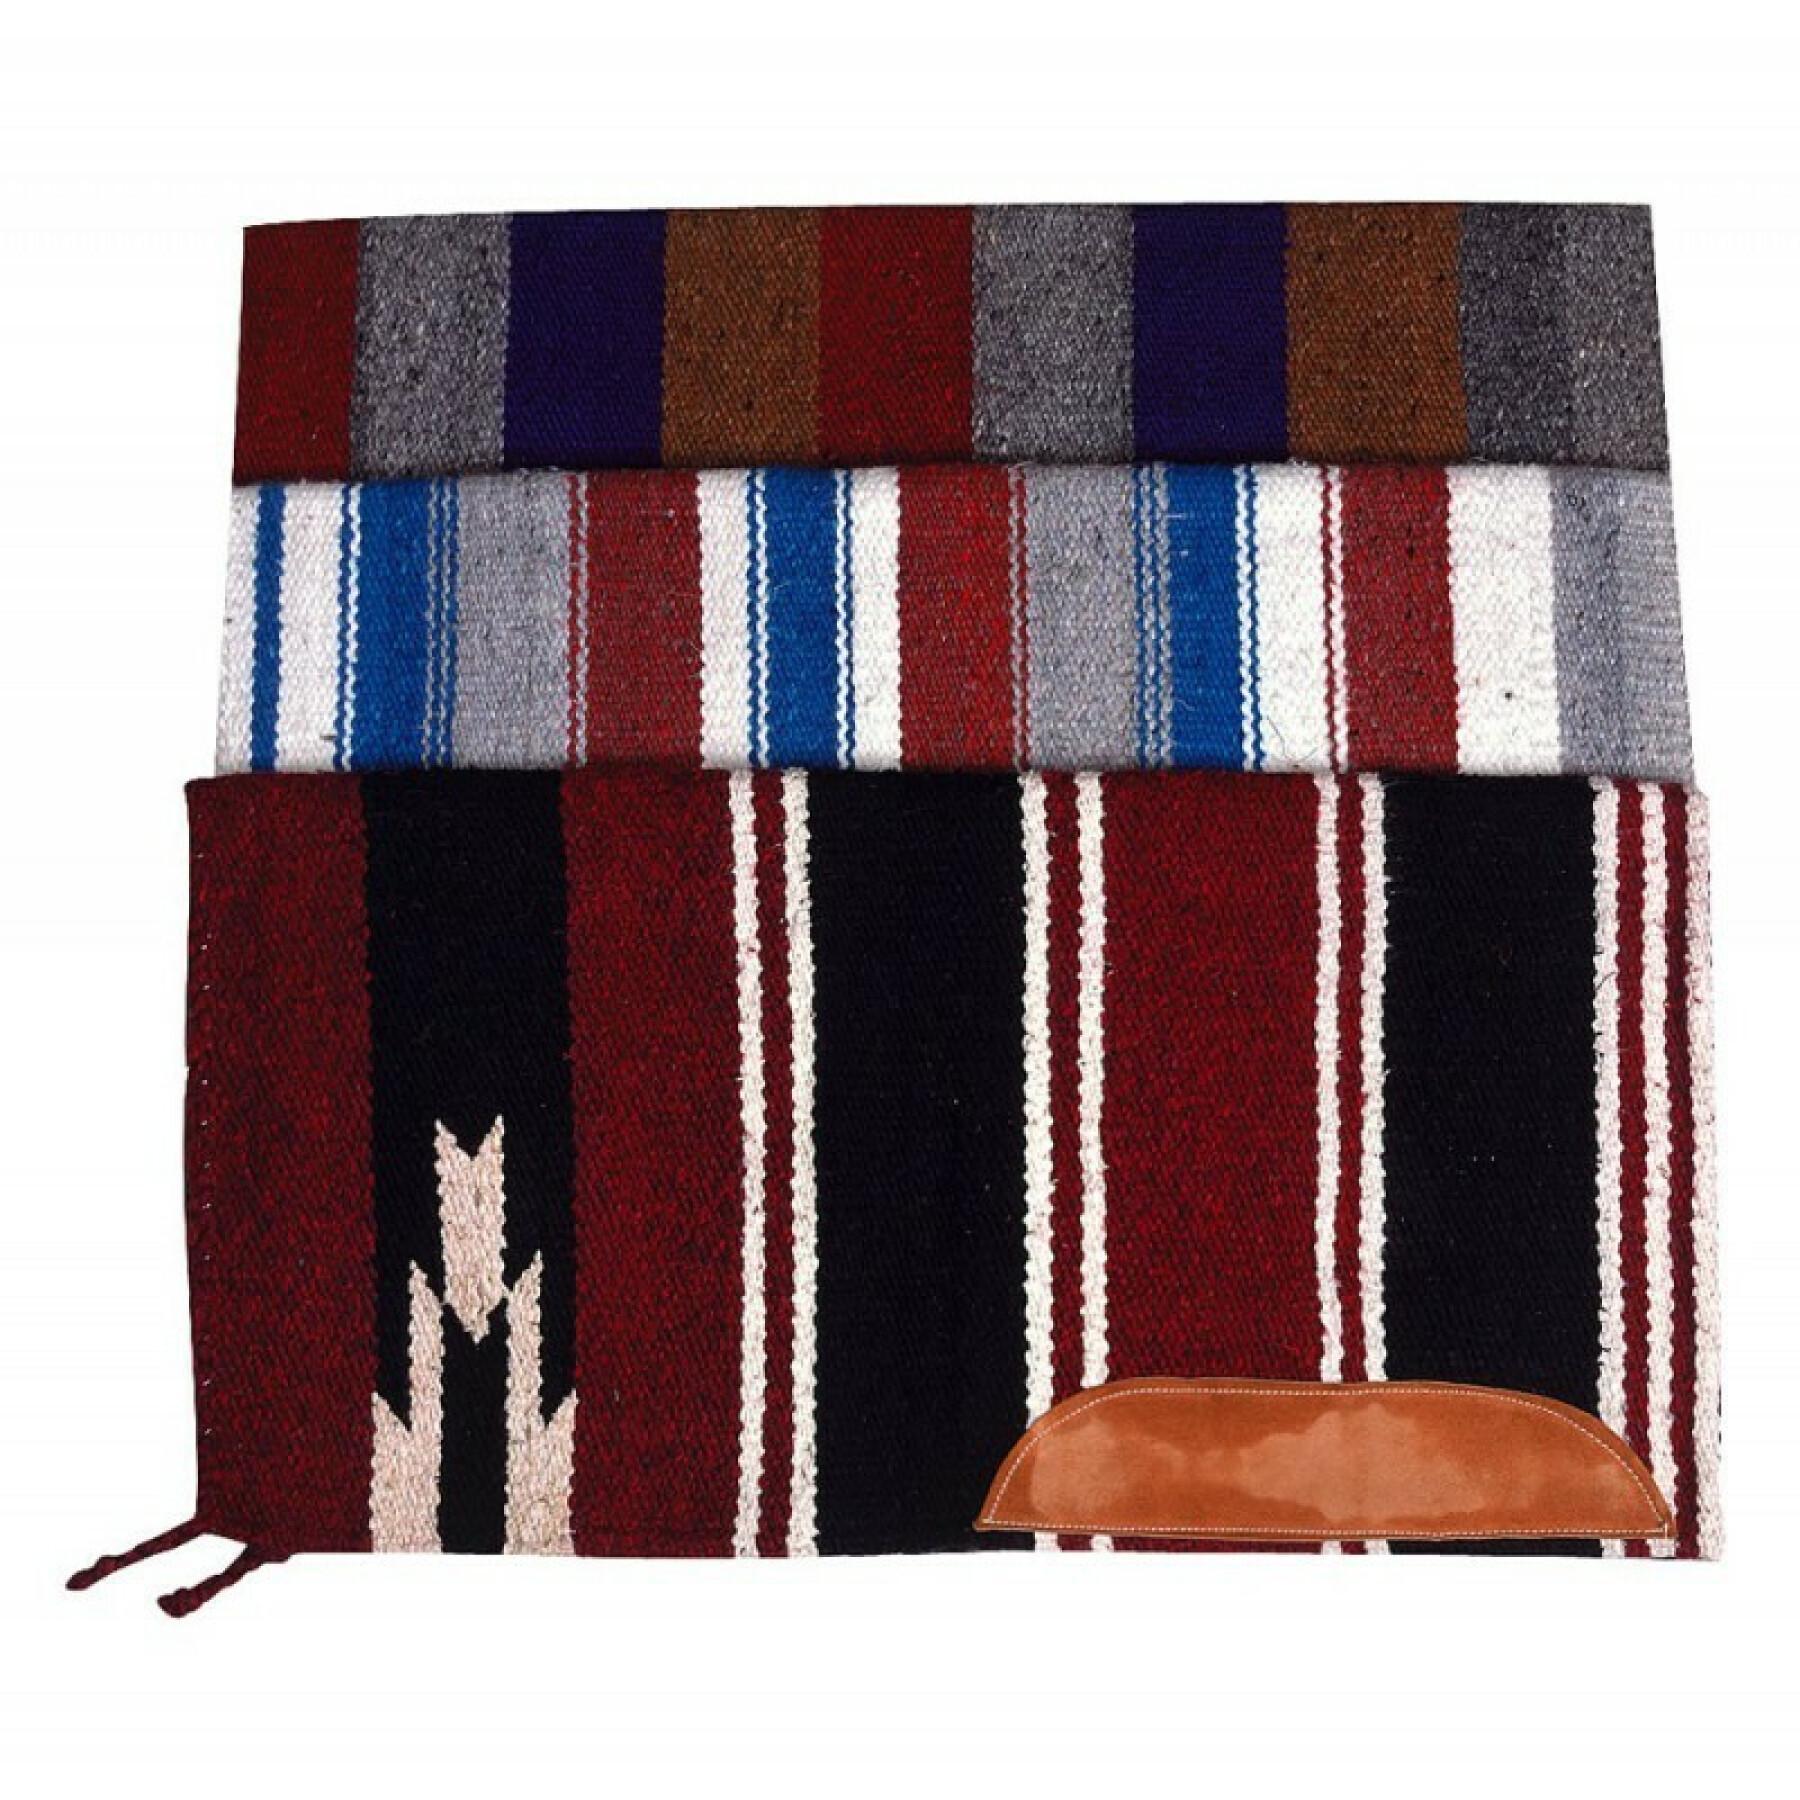 Leather western horse rug Westride Navajo [Size 76 x 152 cm]